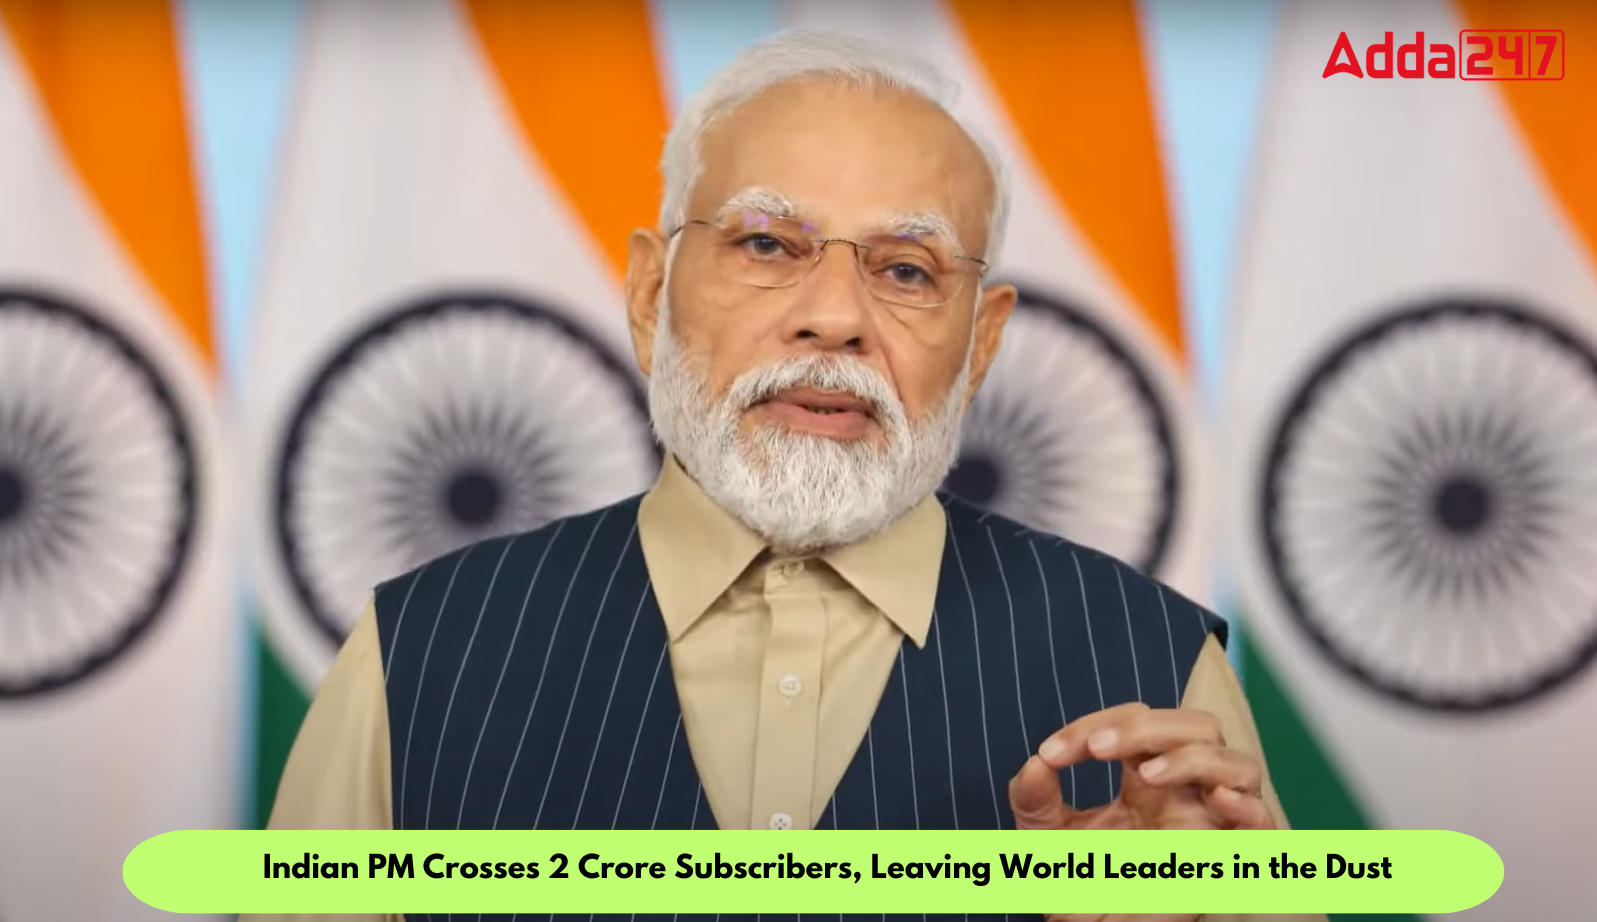 Indian PM Crosses 2 Crore Subscribers, Leaving World Leaders in the Dust